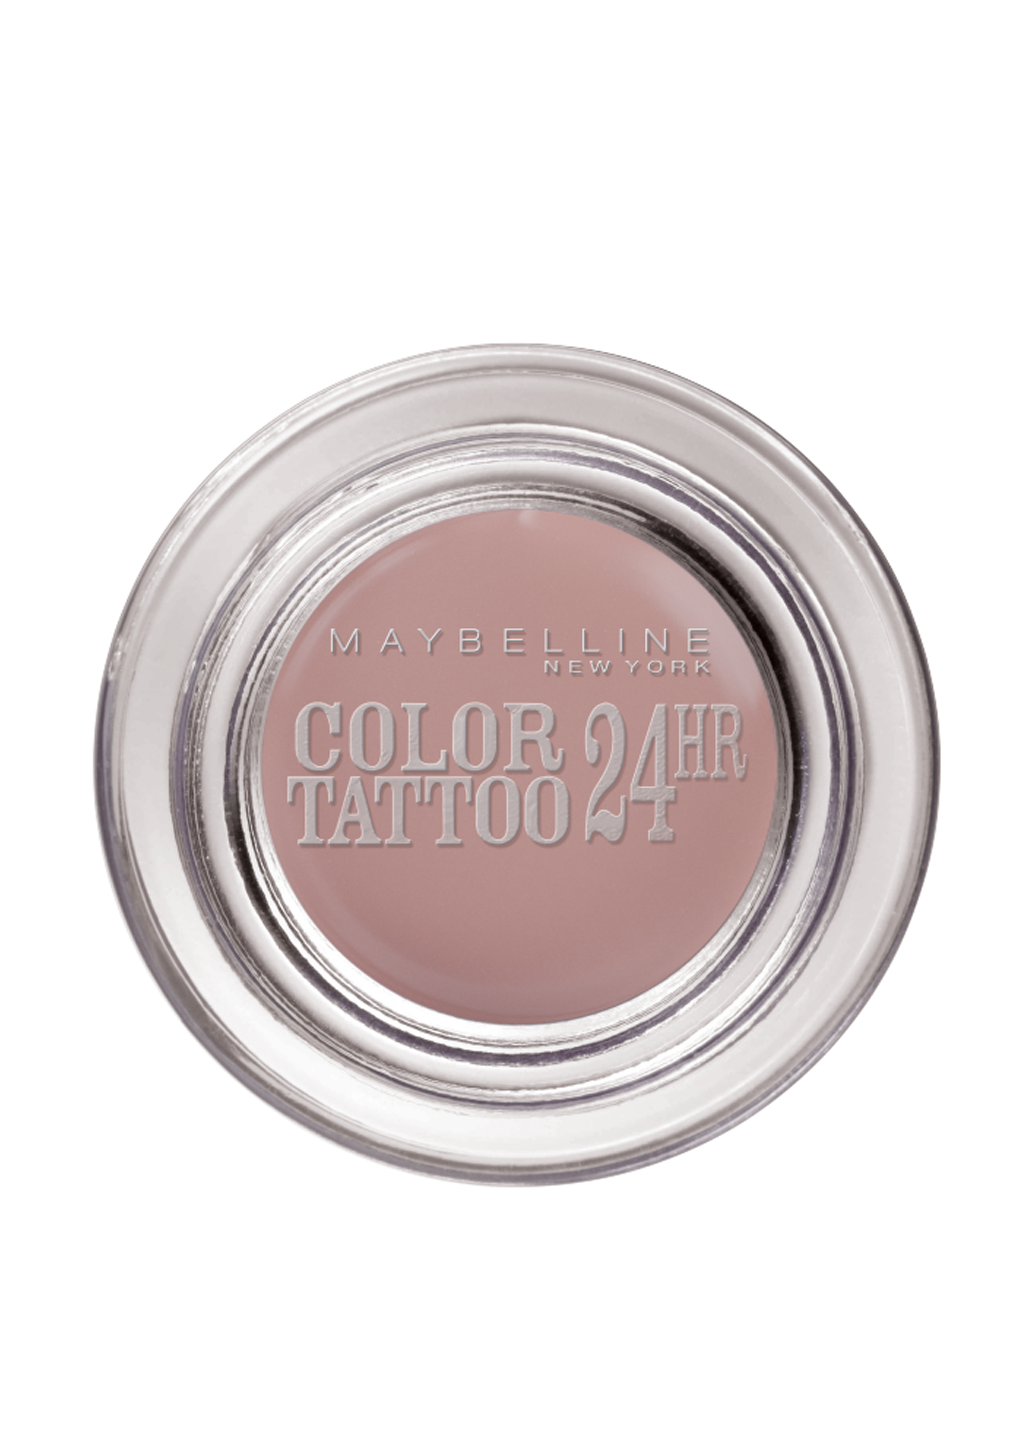 Тени Color Tattoo 24 Hour, № 91, 24 г Maybelline (17135808)